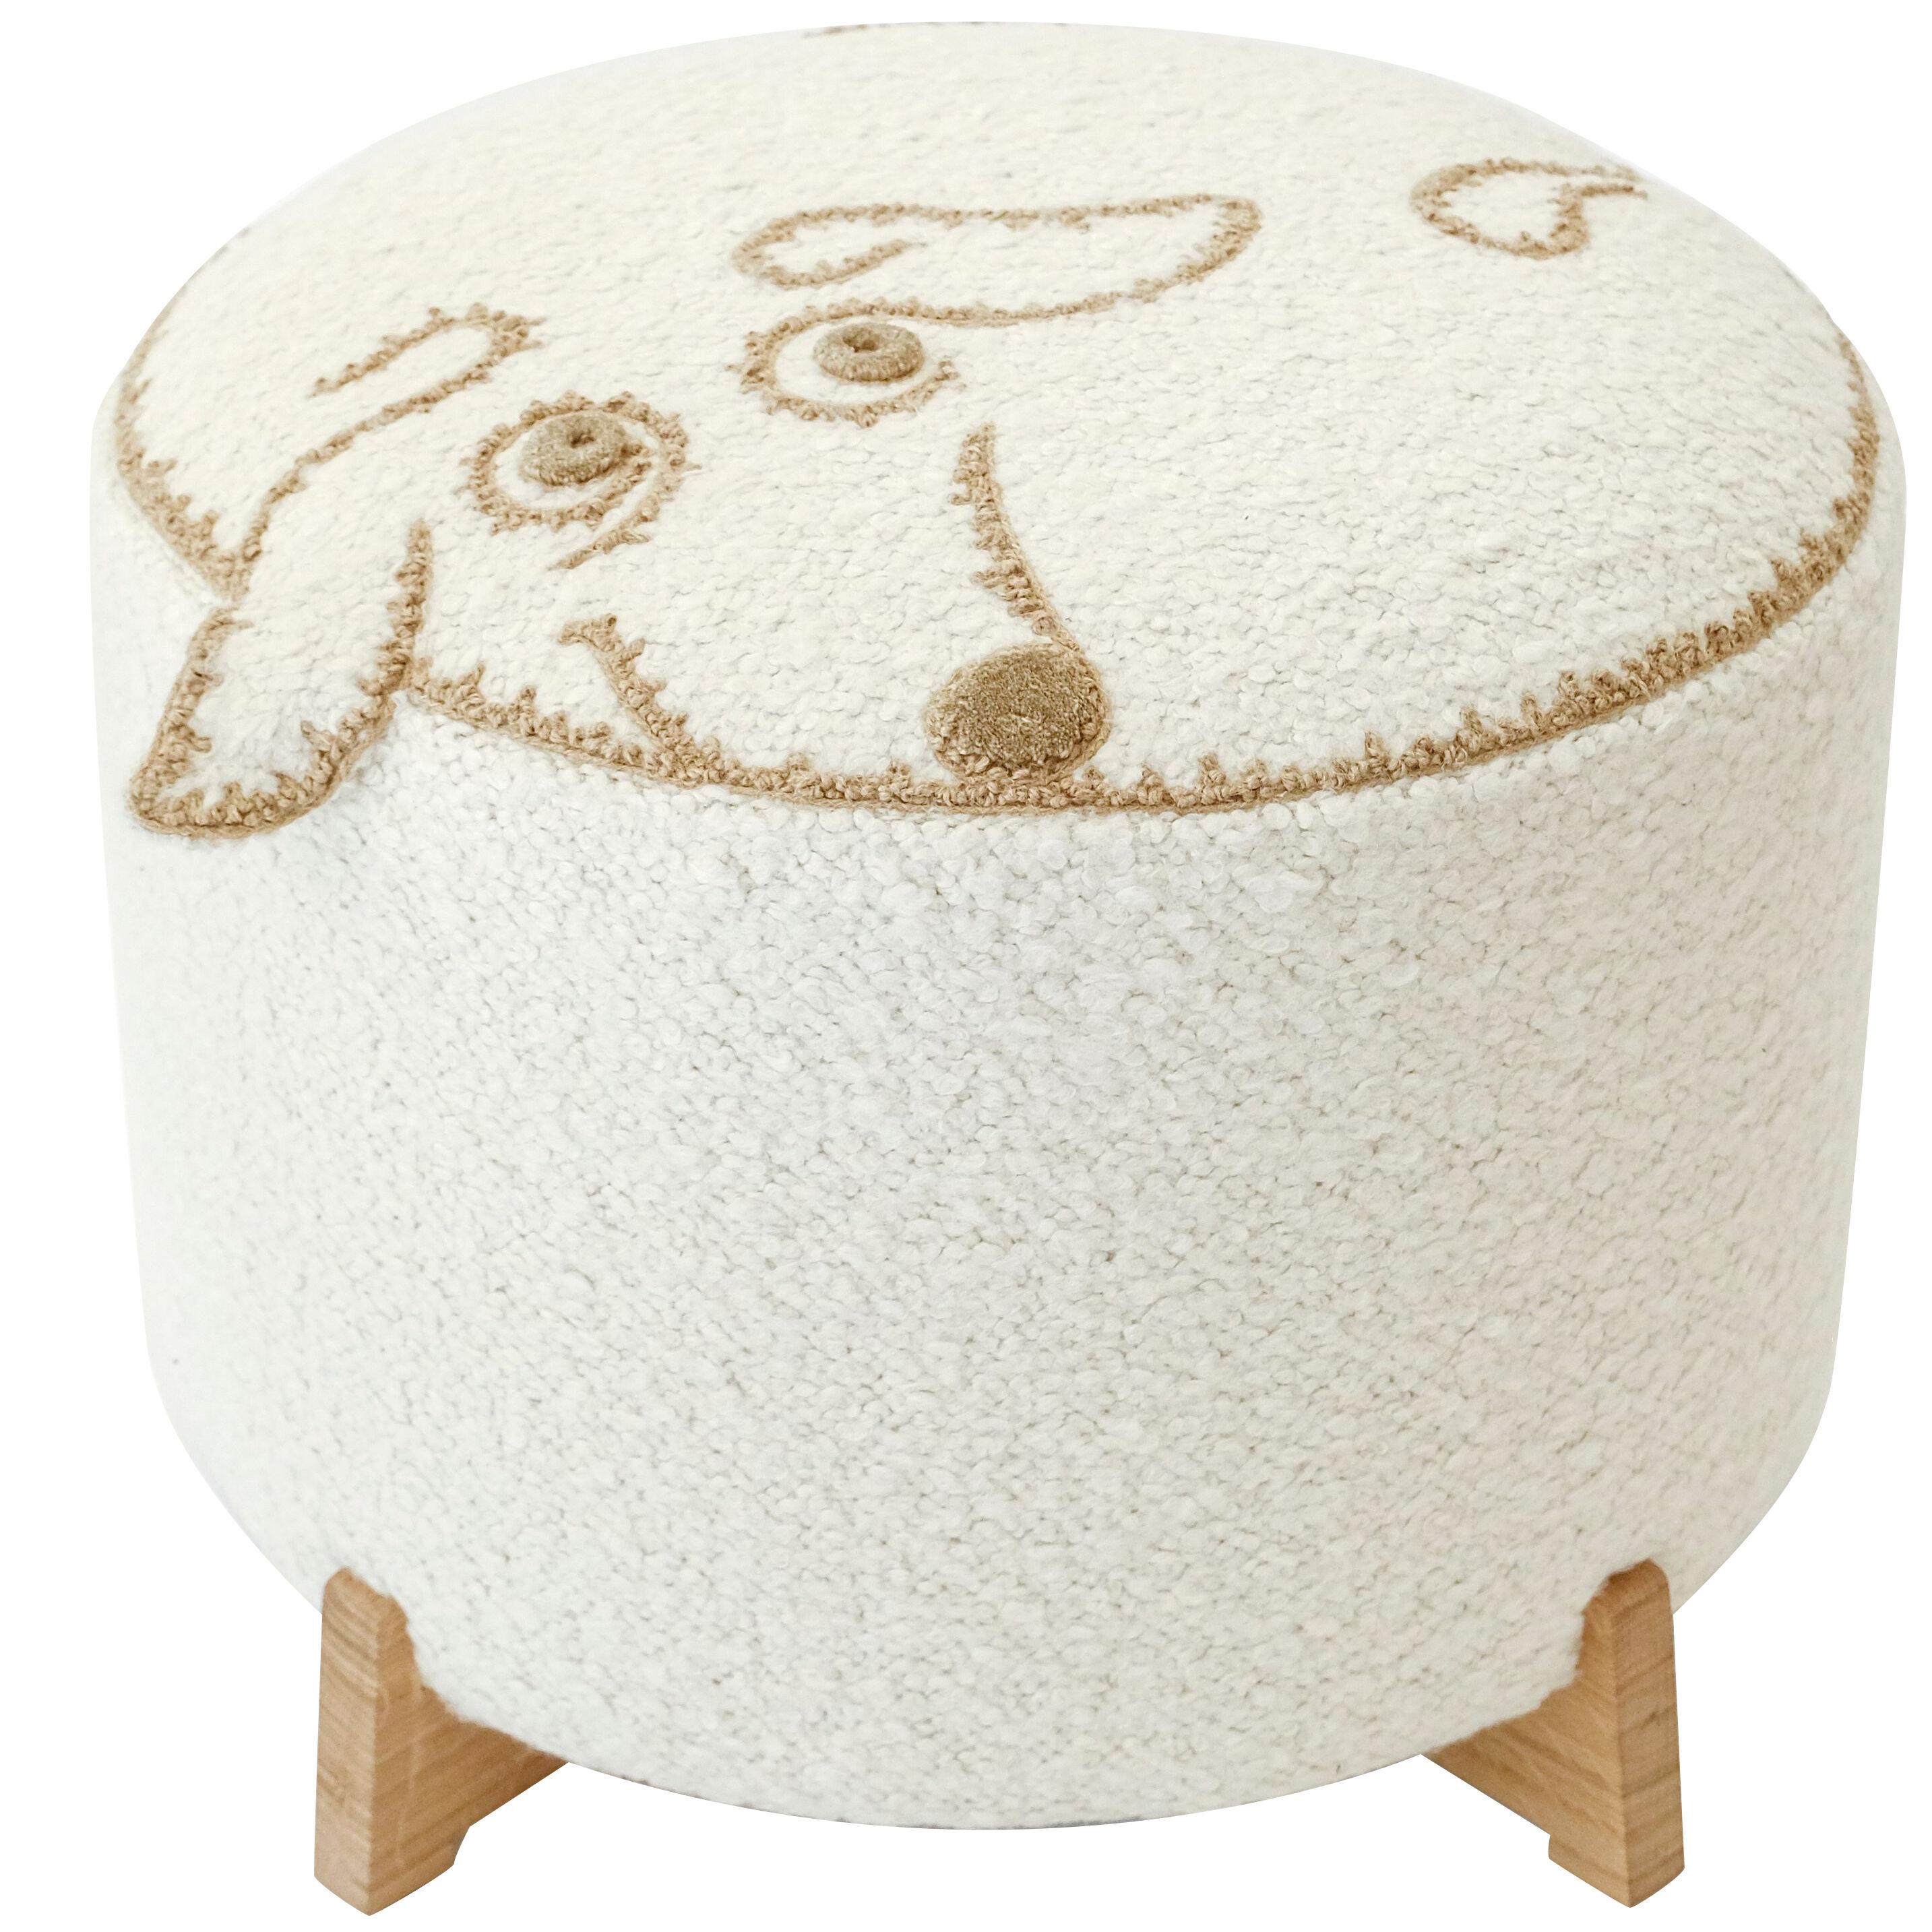 Pouf Alfred by Hubert LE GALL, limited edition of 30 